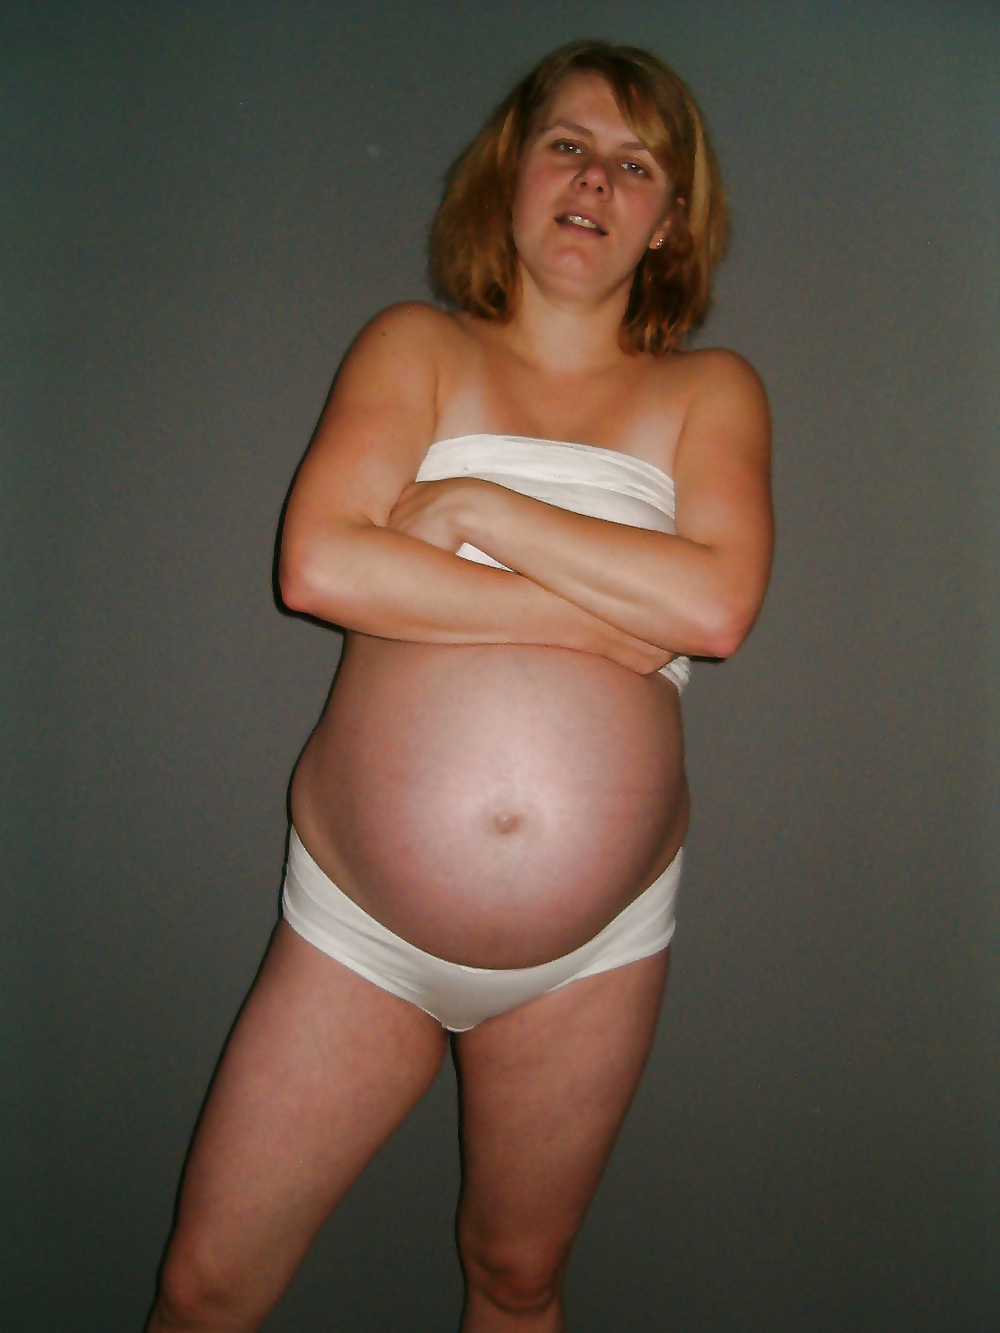 Pregnant mature bitch. How would you fuck her? #13222538